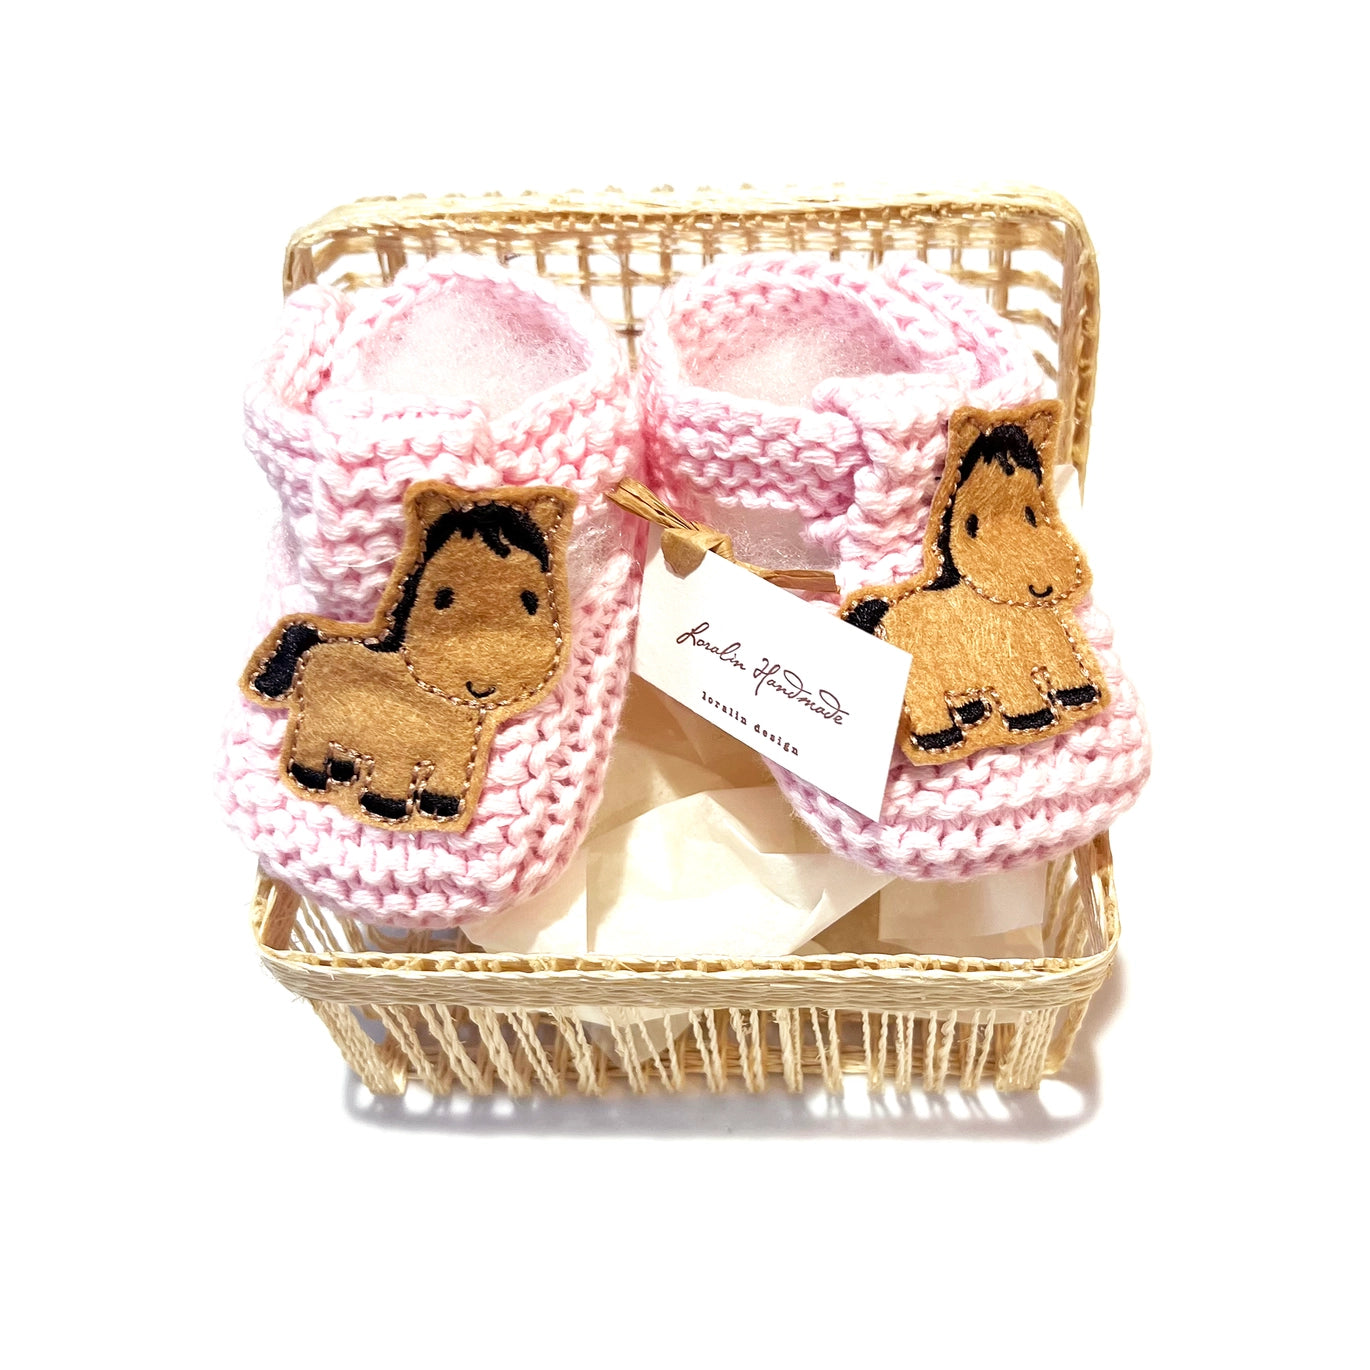 pony booties in a basket